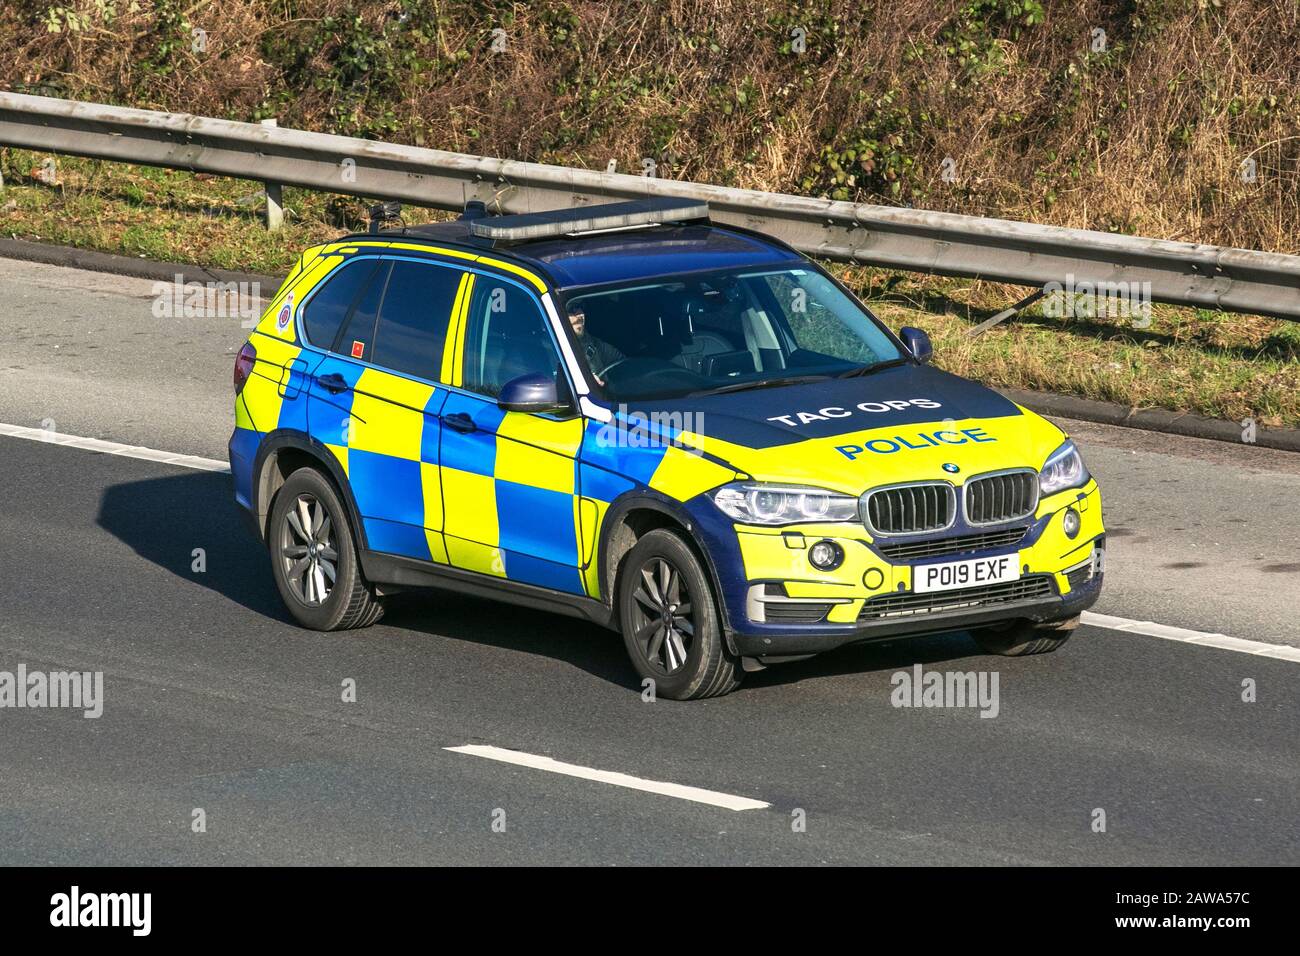 Tac ops, Tactical Operations division. UK Police Vehicular traffic, transport, modern, saloon cars, north-bound on the 3 lane M6 motorway highway. Stock Photo